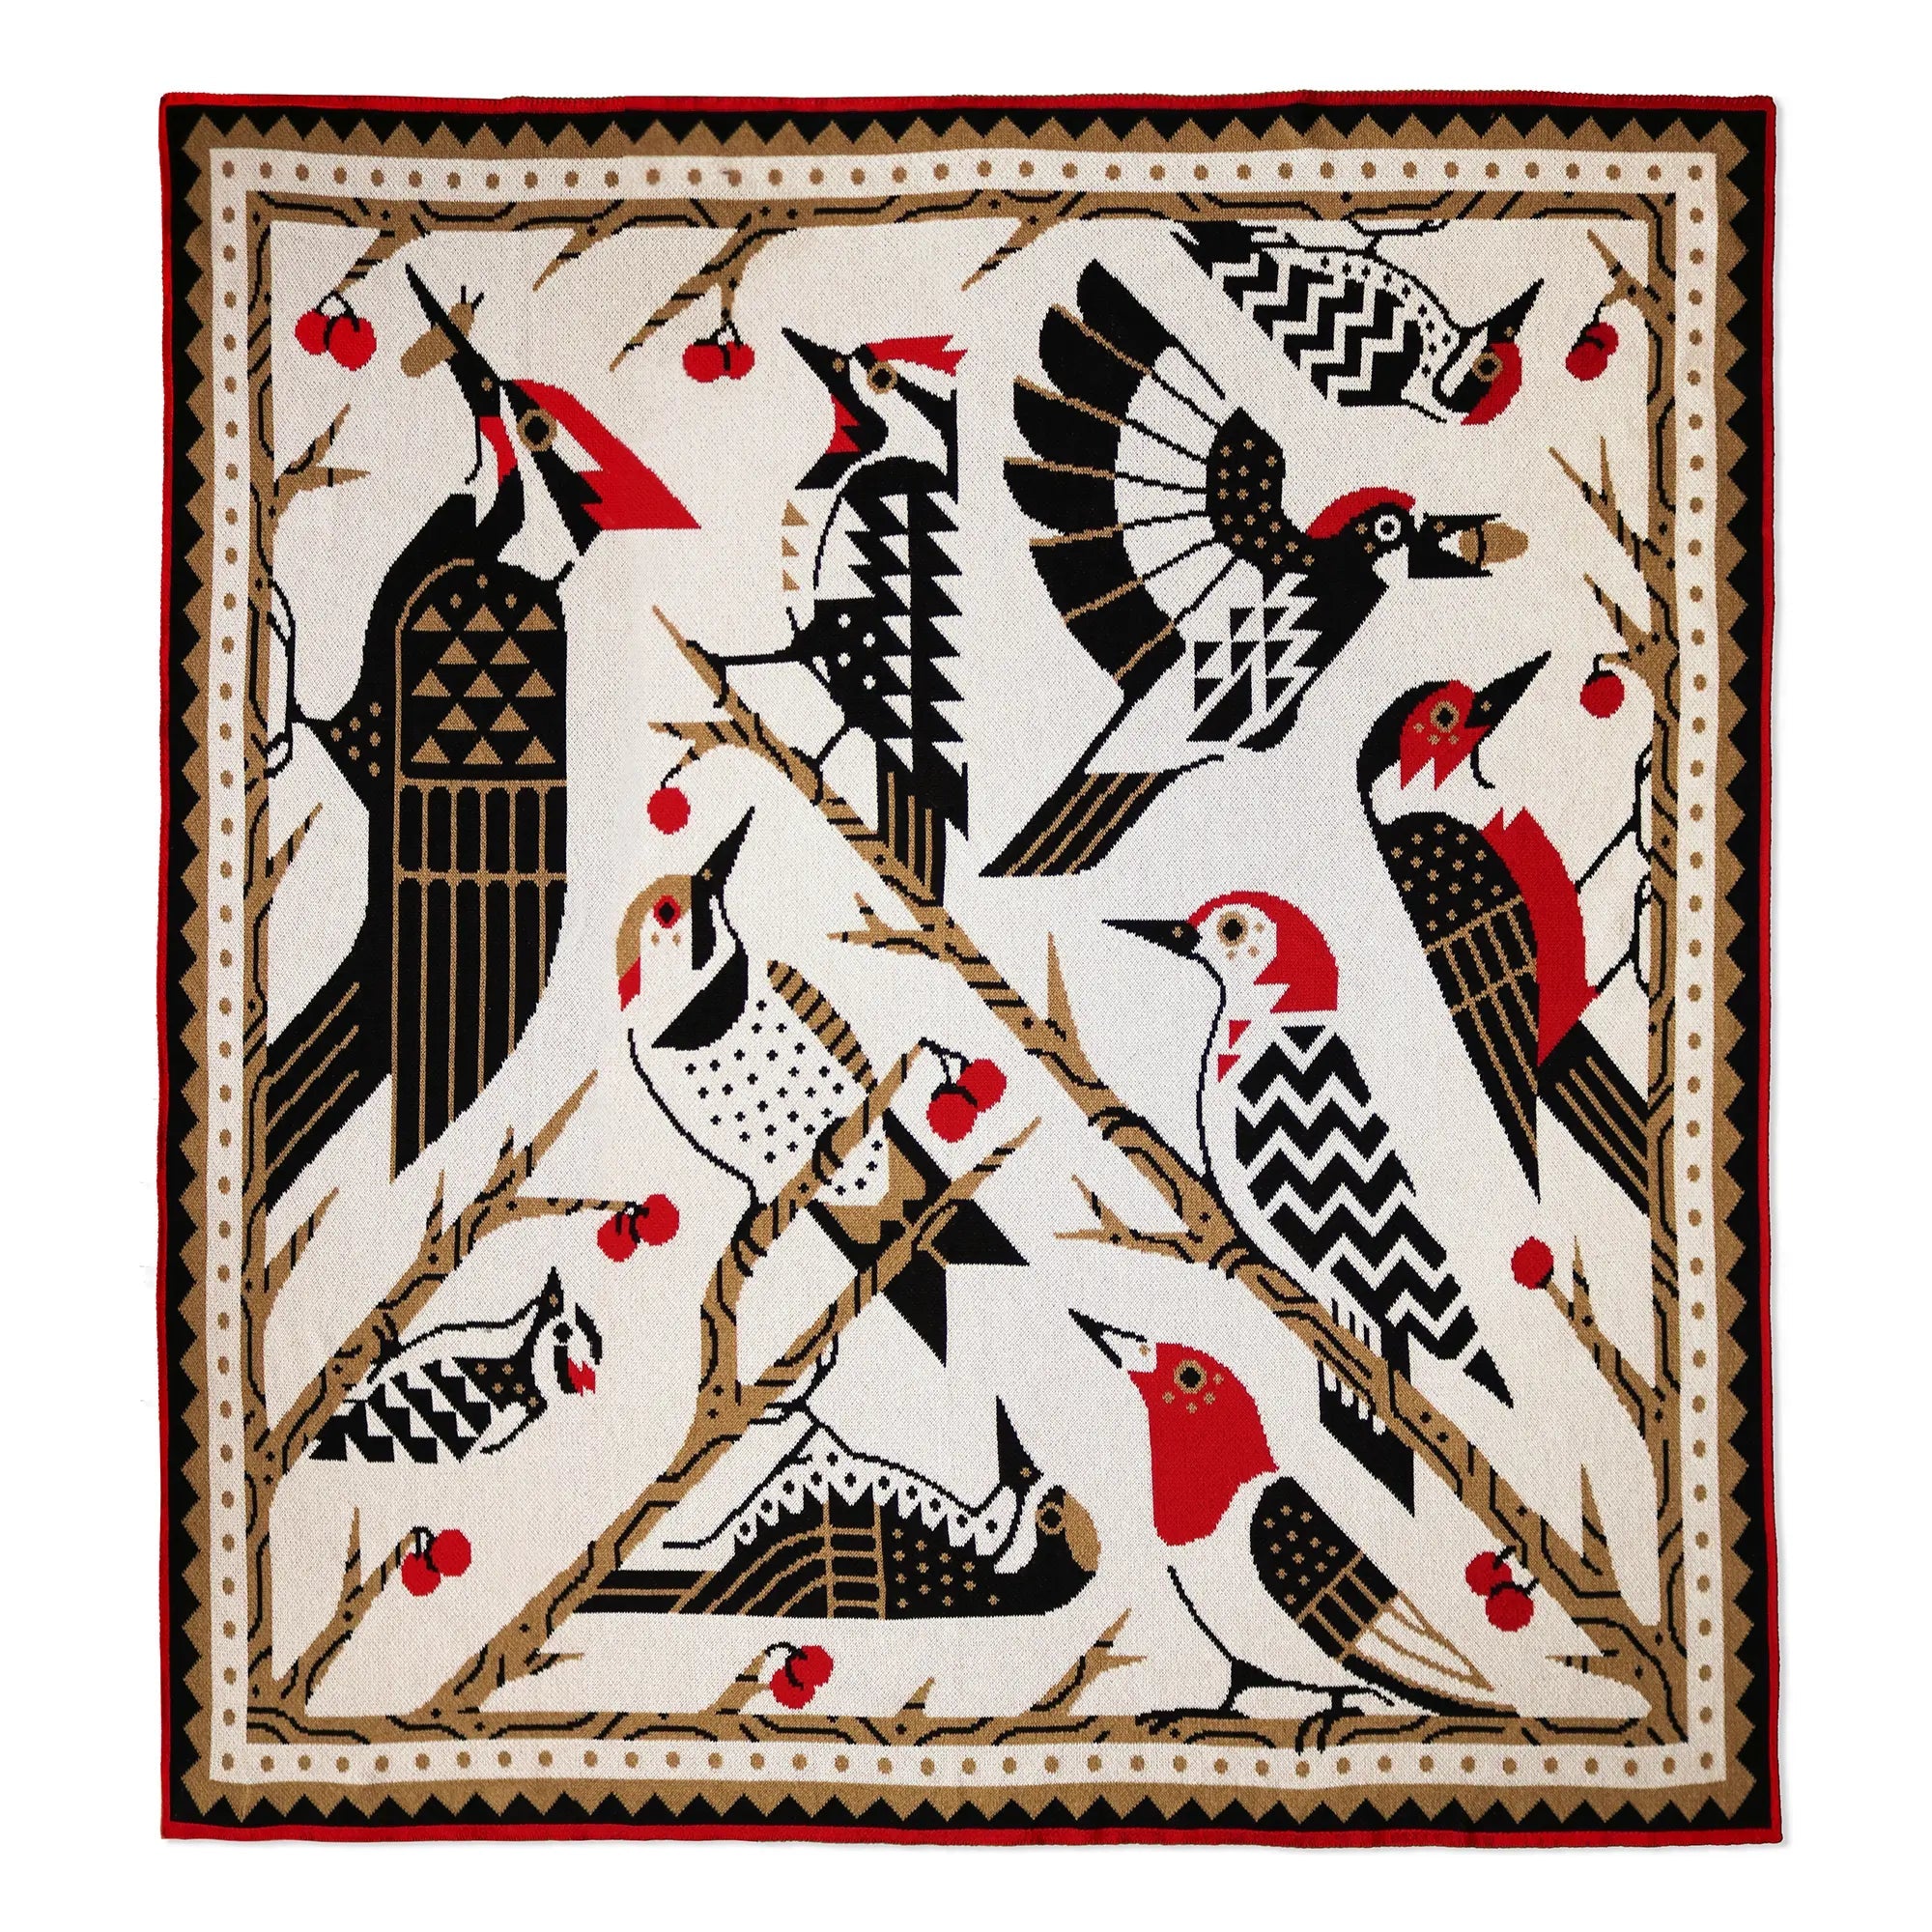 Woodpeckers of North America Knit Blanket - Bird Collective